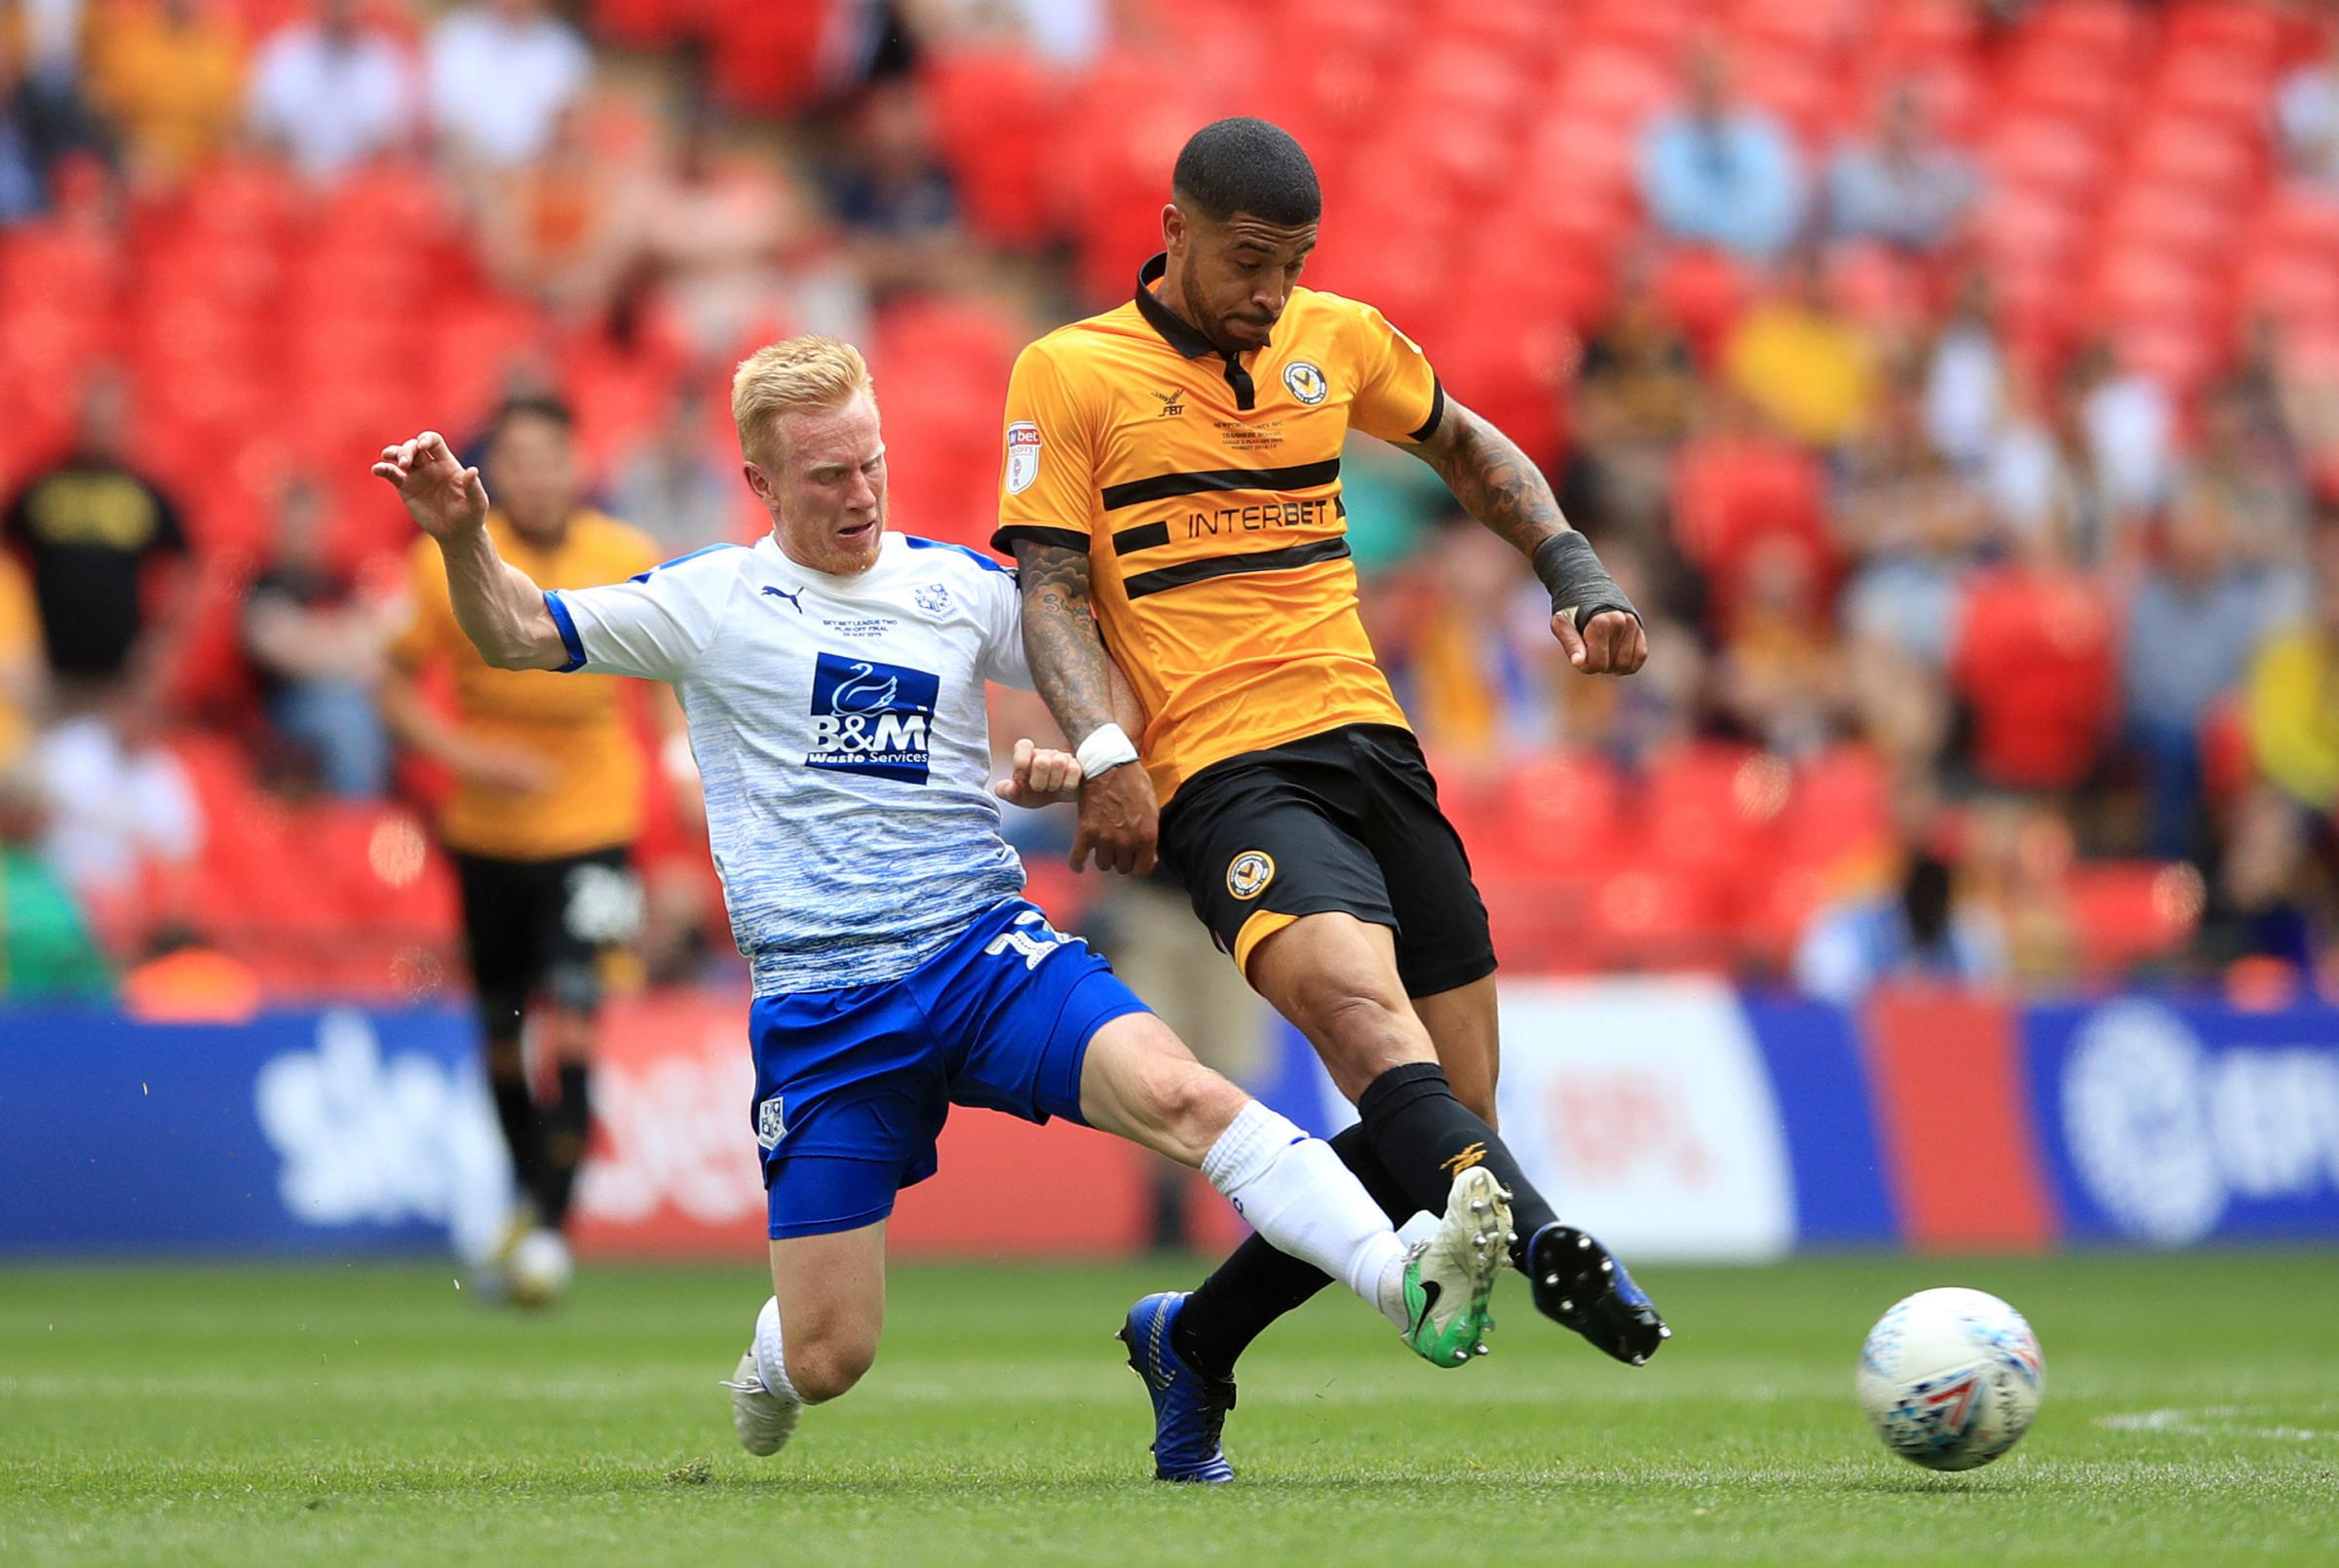 Tranmere Rovers David Perkins (left) and Newport Countys Joss Labadie battle for the ball during the Sky Bet League Two Play-off final at Wembley Stadium, London. PRESS ASSOCIATION Photo. Picture date: Saturday May 25, 2019. See PA story SOCCER